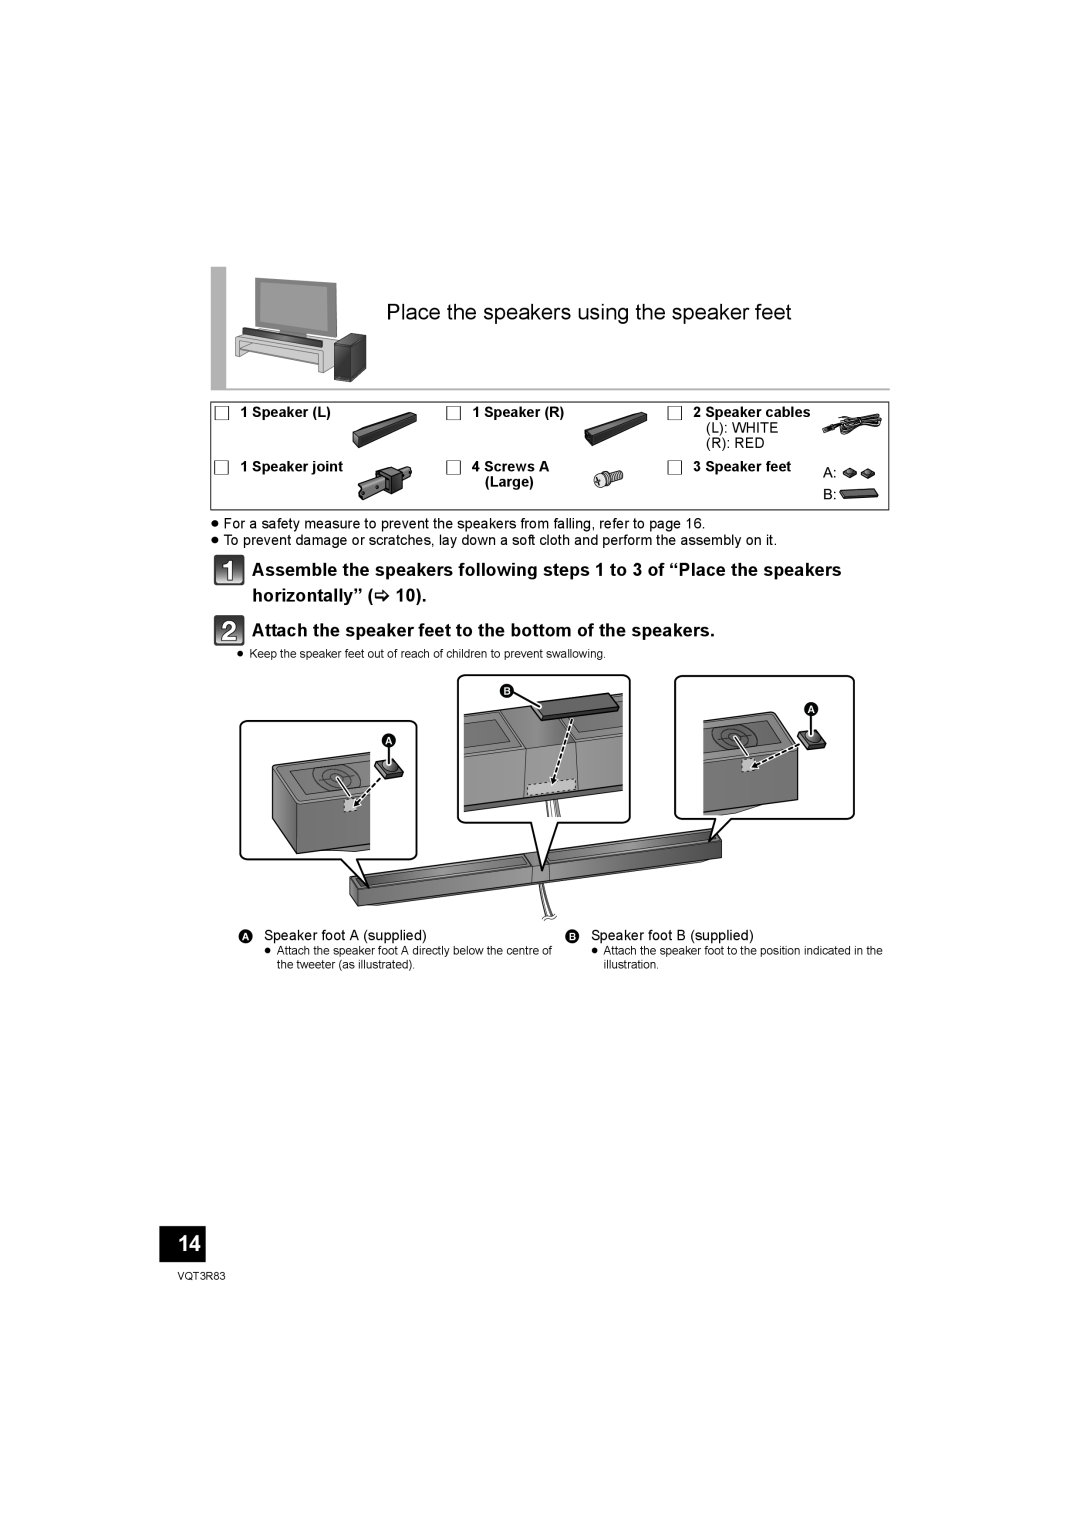 Panasonic SC-HTB15 operating instructions Place the speakers using the speaker feet 